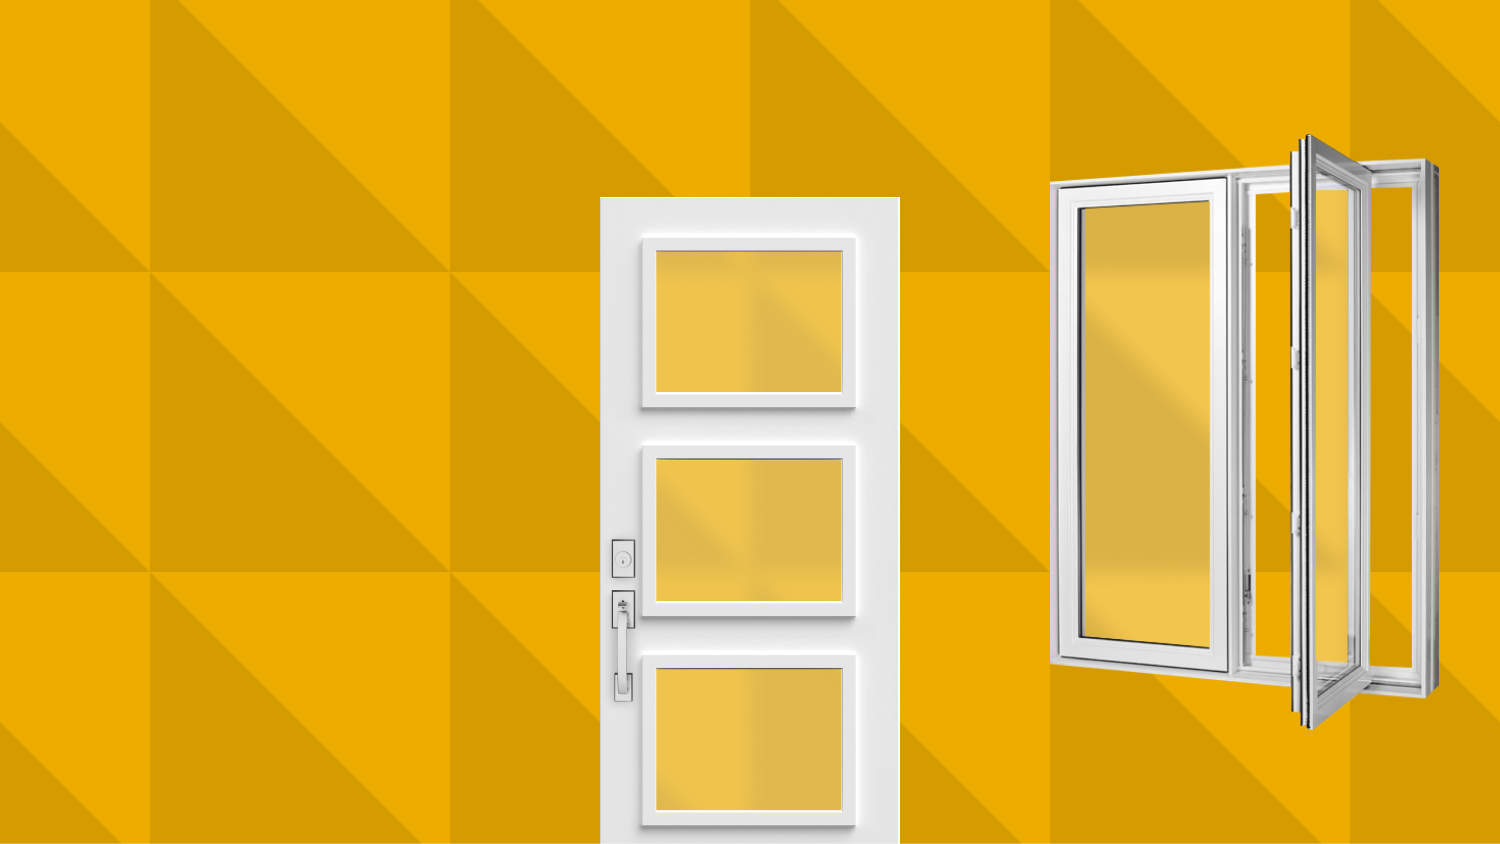 Contest: You could win up to $10,000 for new doors and windows